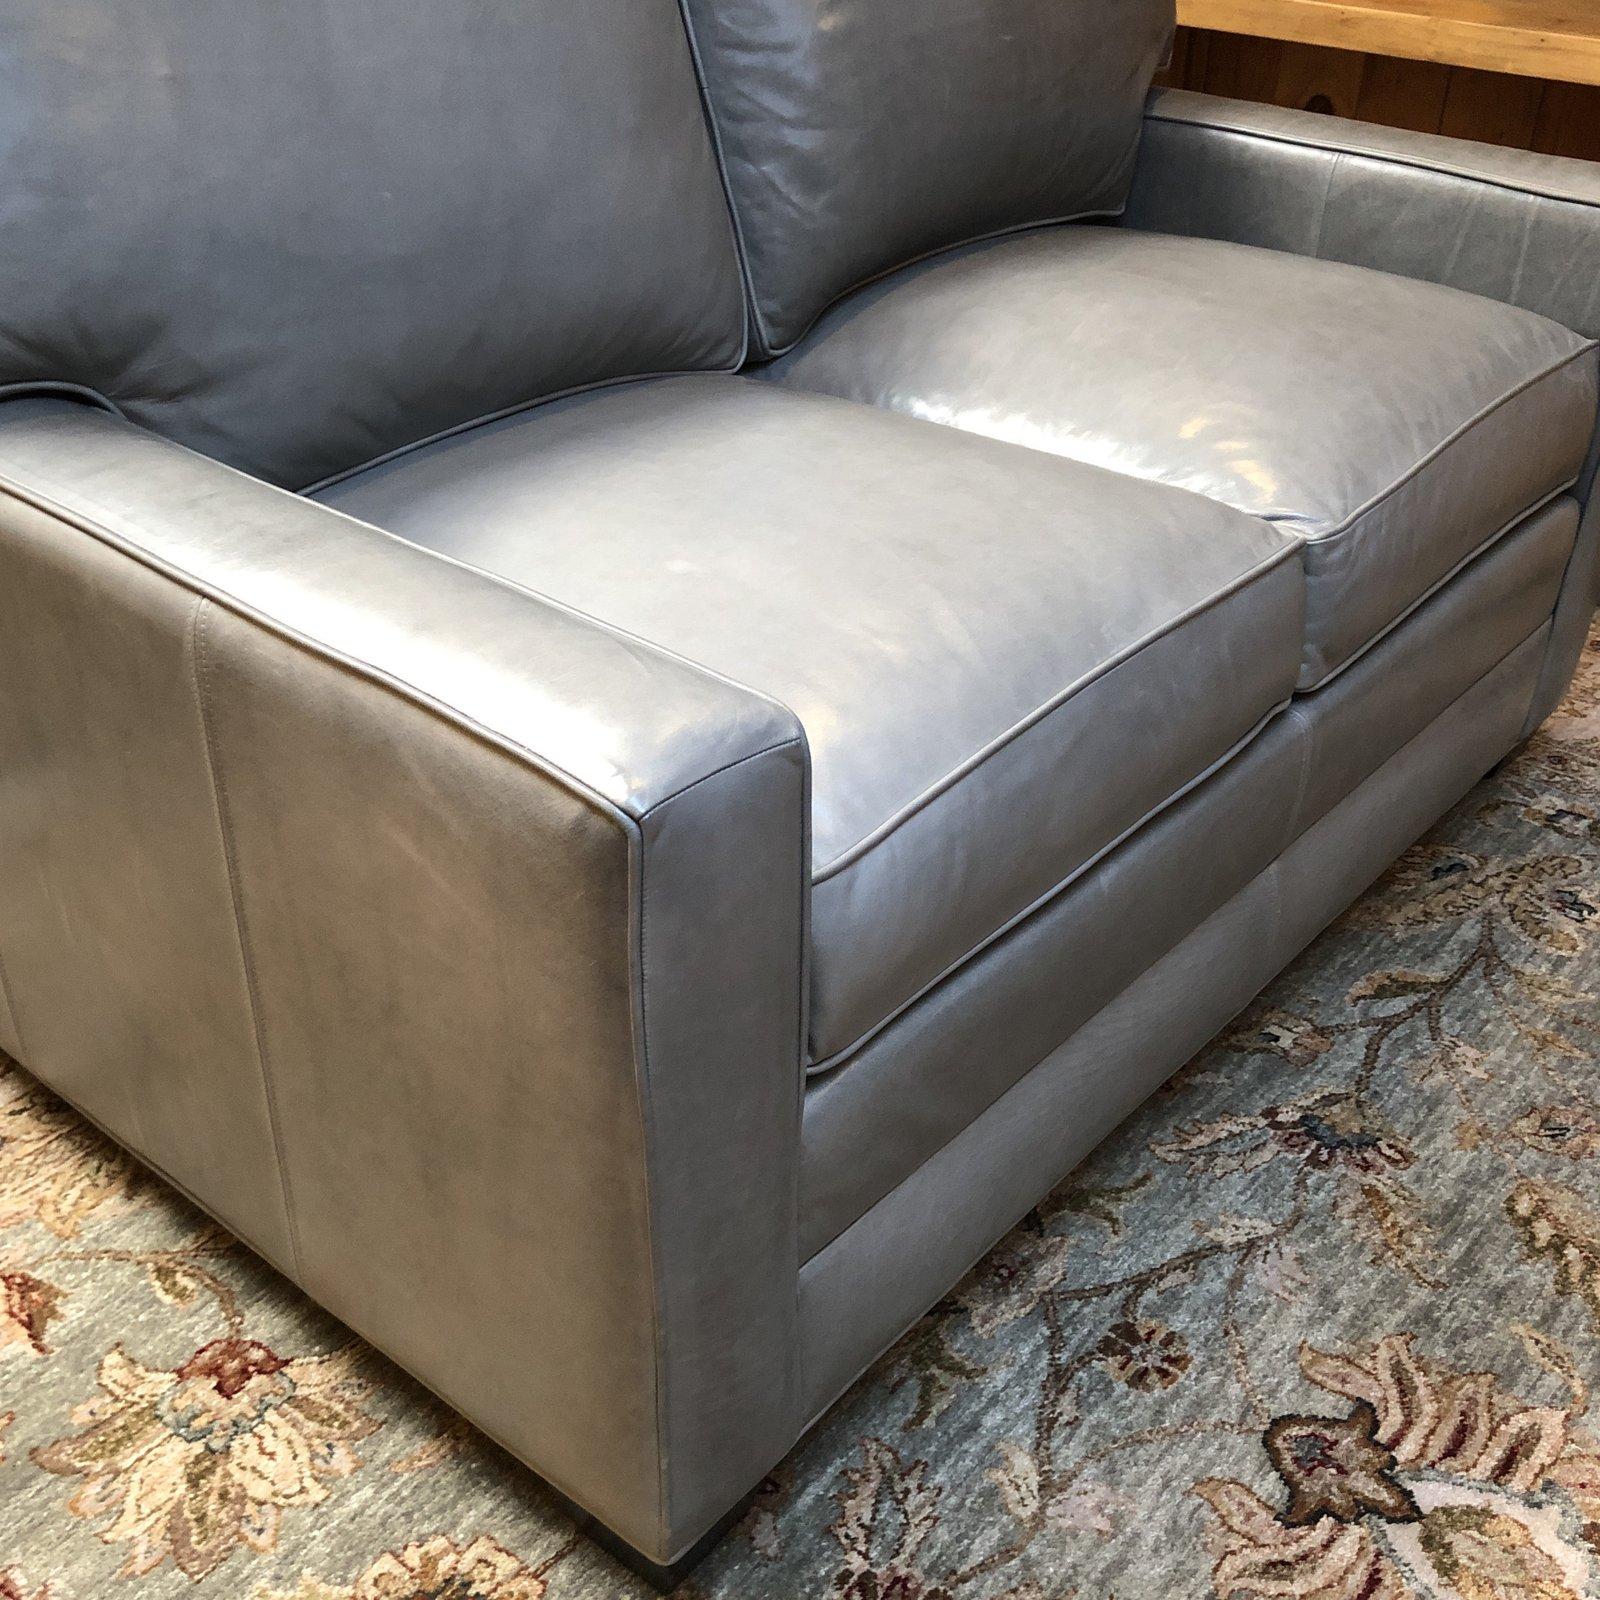 A Bennett Loveseat from Ethan Allen. Timeless, contemporary profile, the loveseat has simple track arms. The gray top grain leather envelopes loose welted back cushion with hook-and-loop fasteners, and foam seat cushions. An engineered hardwood